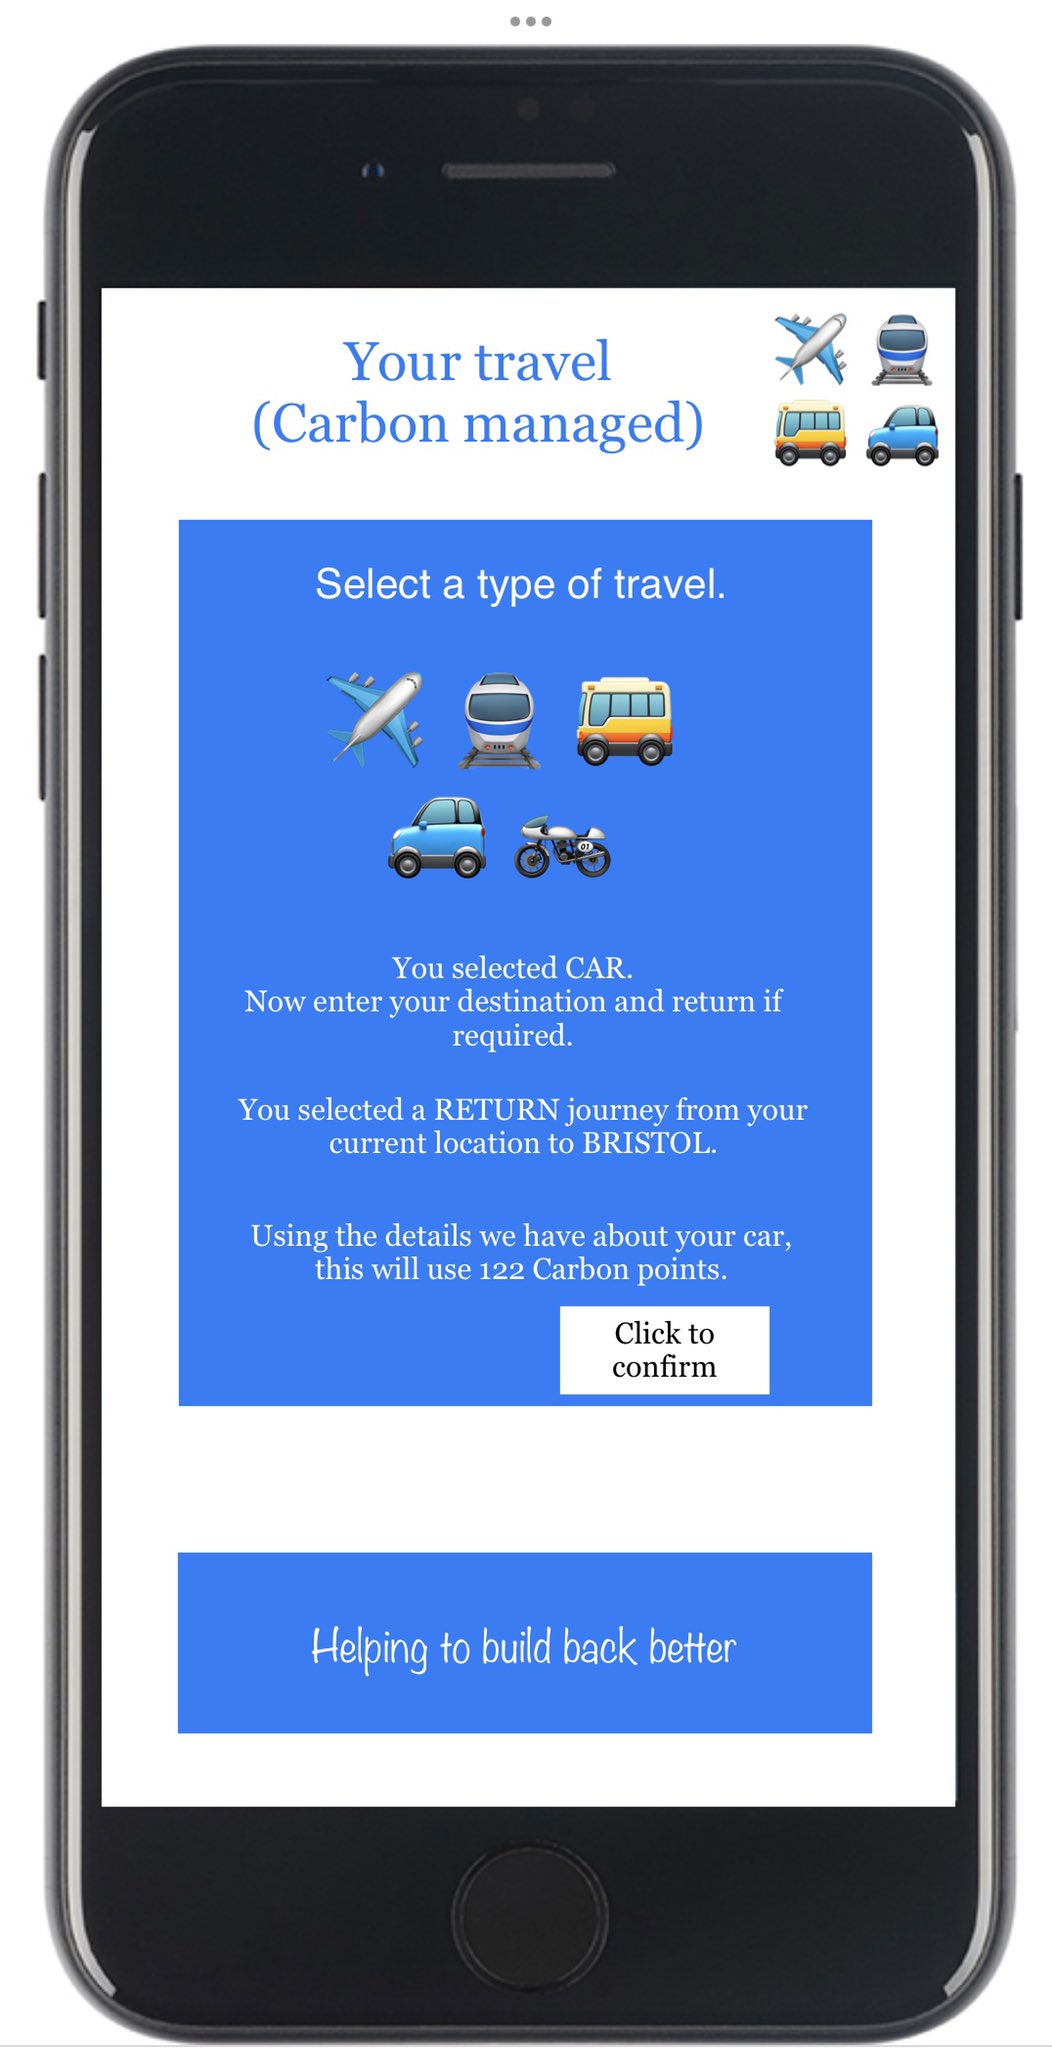 Your travel. Carbon managed. Select a type of travel. Plane Train Bus Car Motorbike. You selected car. Now enter your destination and return if required. You selected a return journey from your current location to Bristol. Using the details we have about your car, this will use 122 carbon points. Click to confirm. Helping to build back better.